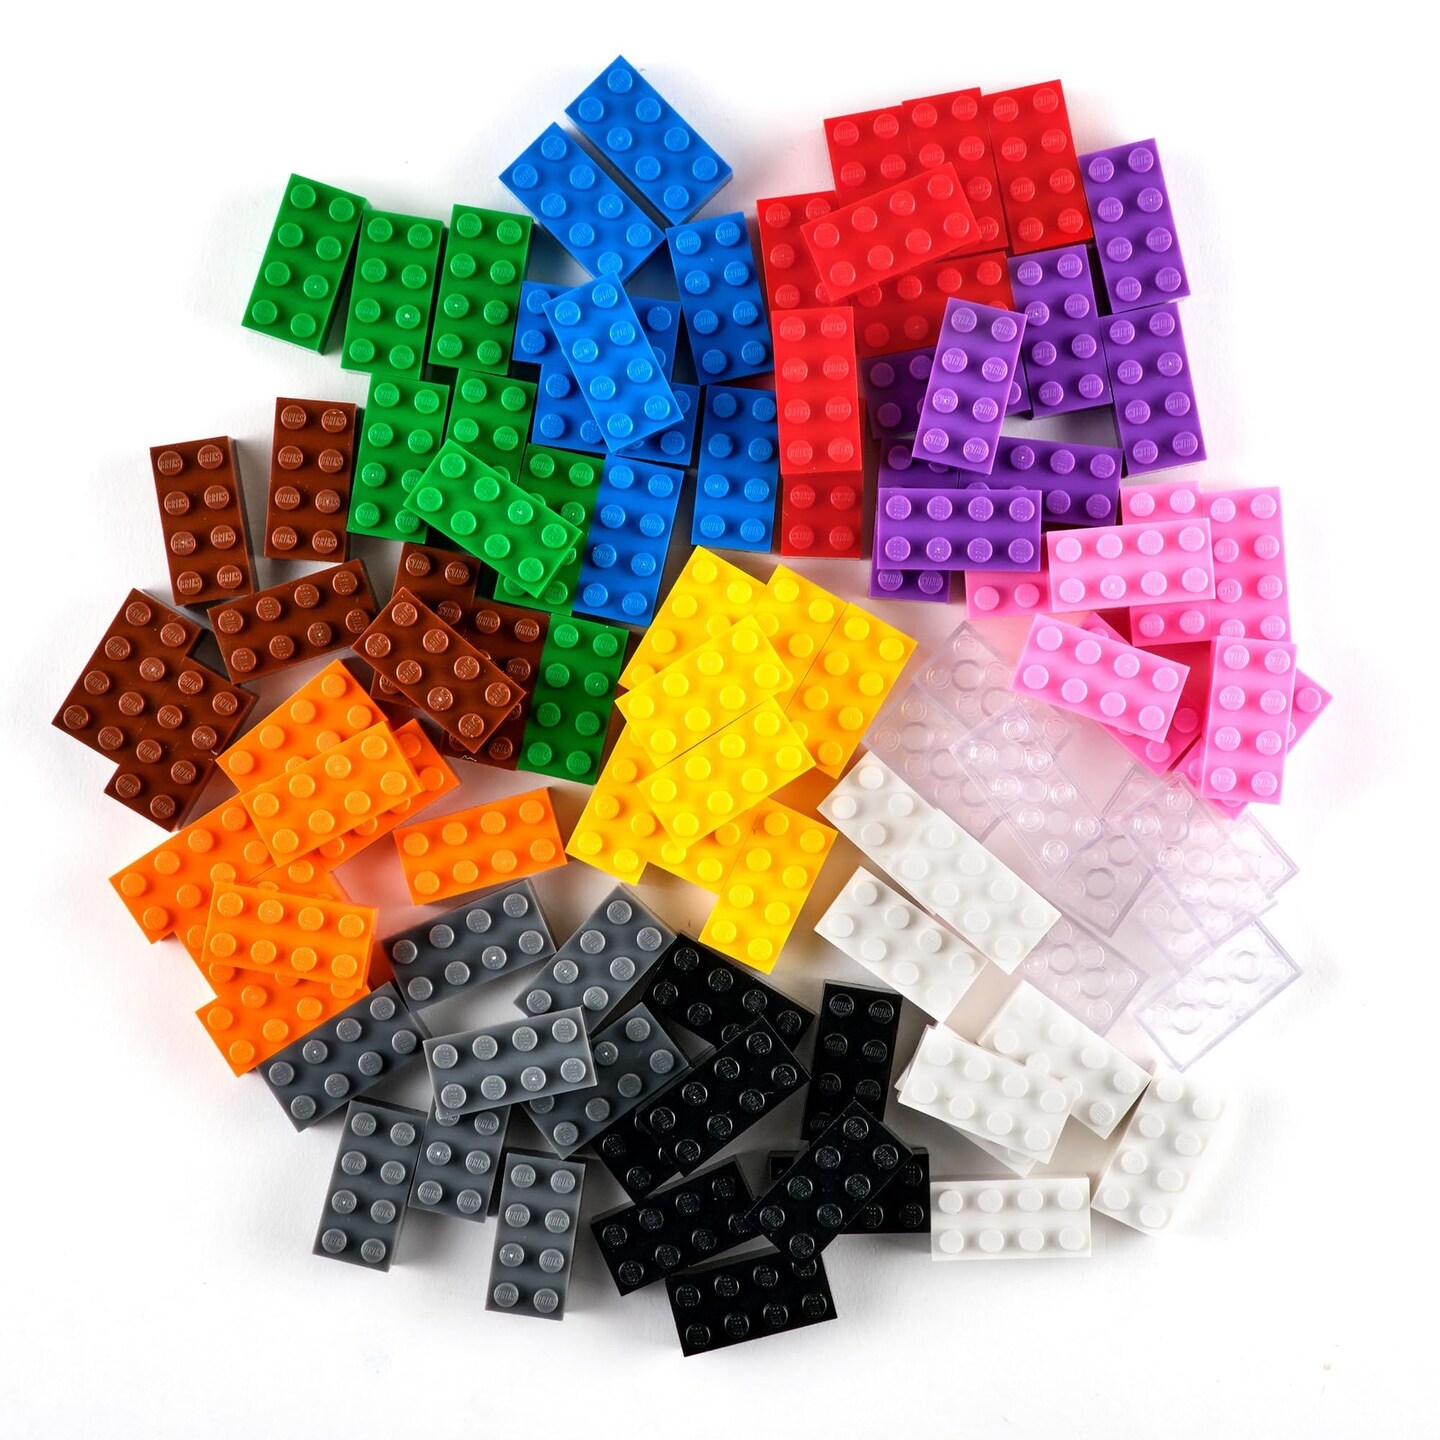 Strictly Briks Classic Bricks Starter Kit, 12 Colors, 96 Pieces, 2x4 Inches, Building Creative Play Set for Ages 3 and Up, 100% Compatible with All Major Brick Brands